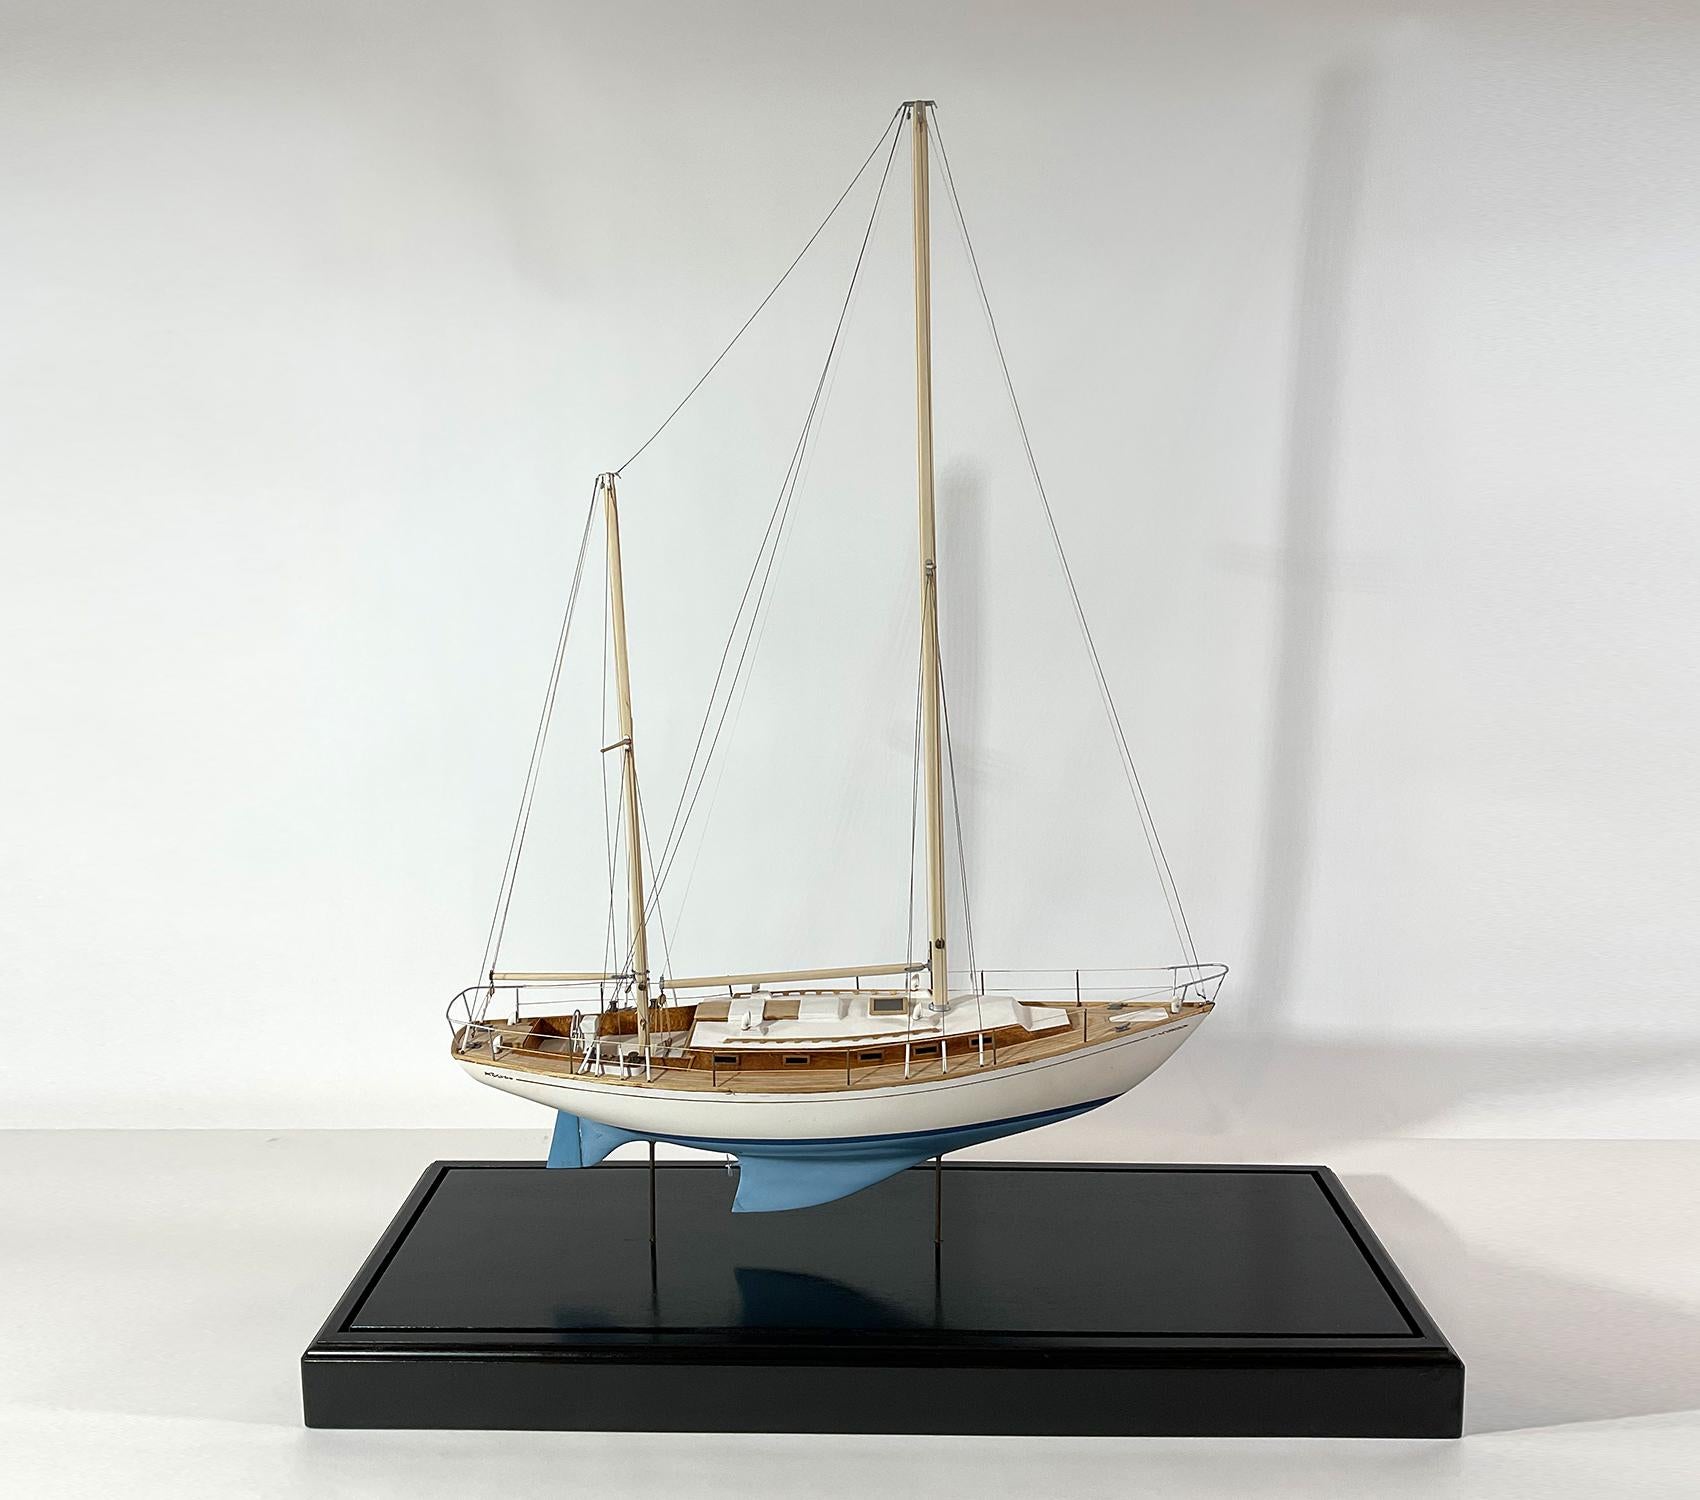 North American Cased Model Of A Cheoy Lee Offshore 47 Ketch For Sale